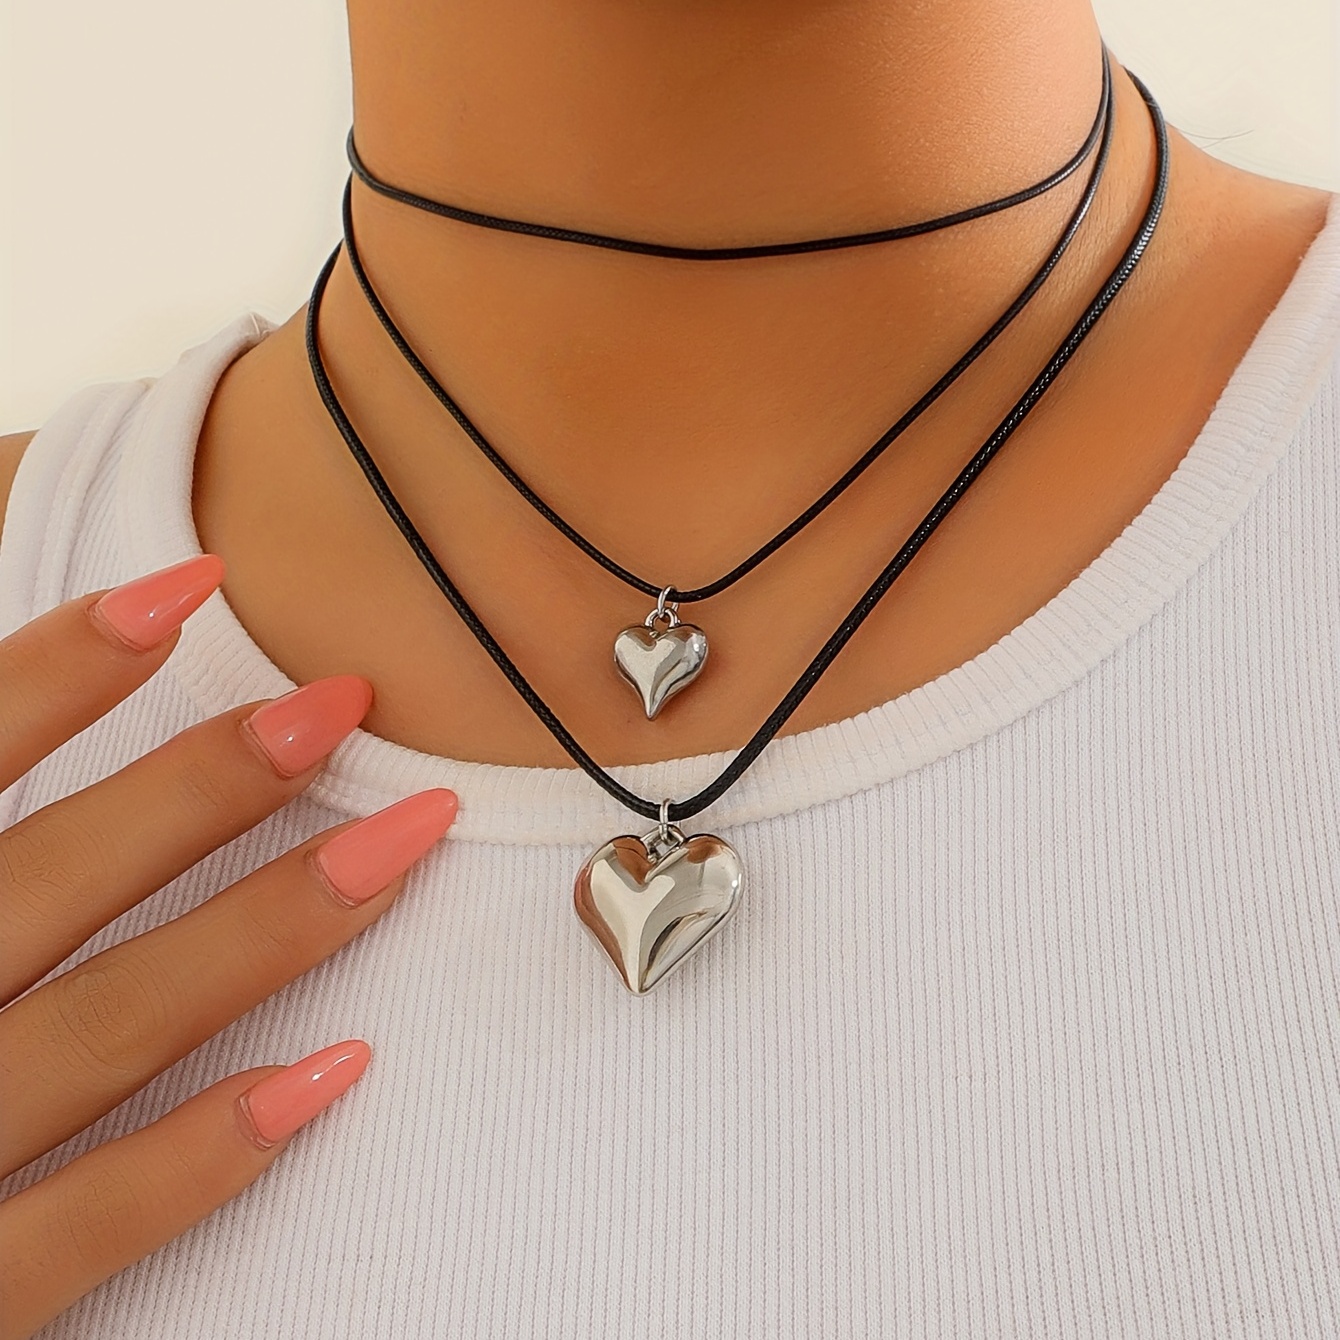 Fashion Simple Black Love Heart Pendant Necklace Clavicle Chain, Discounts  For Everyone